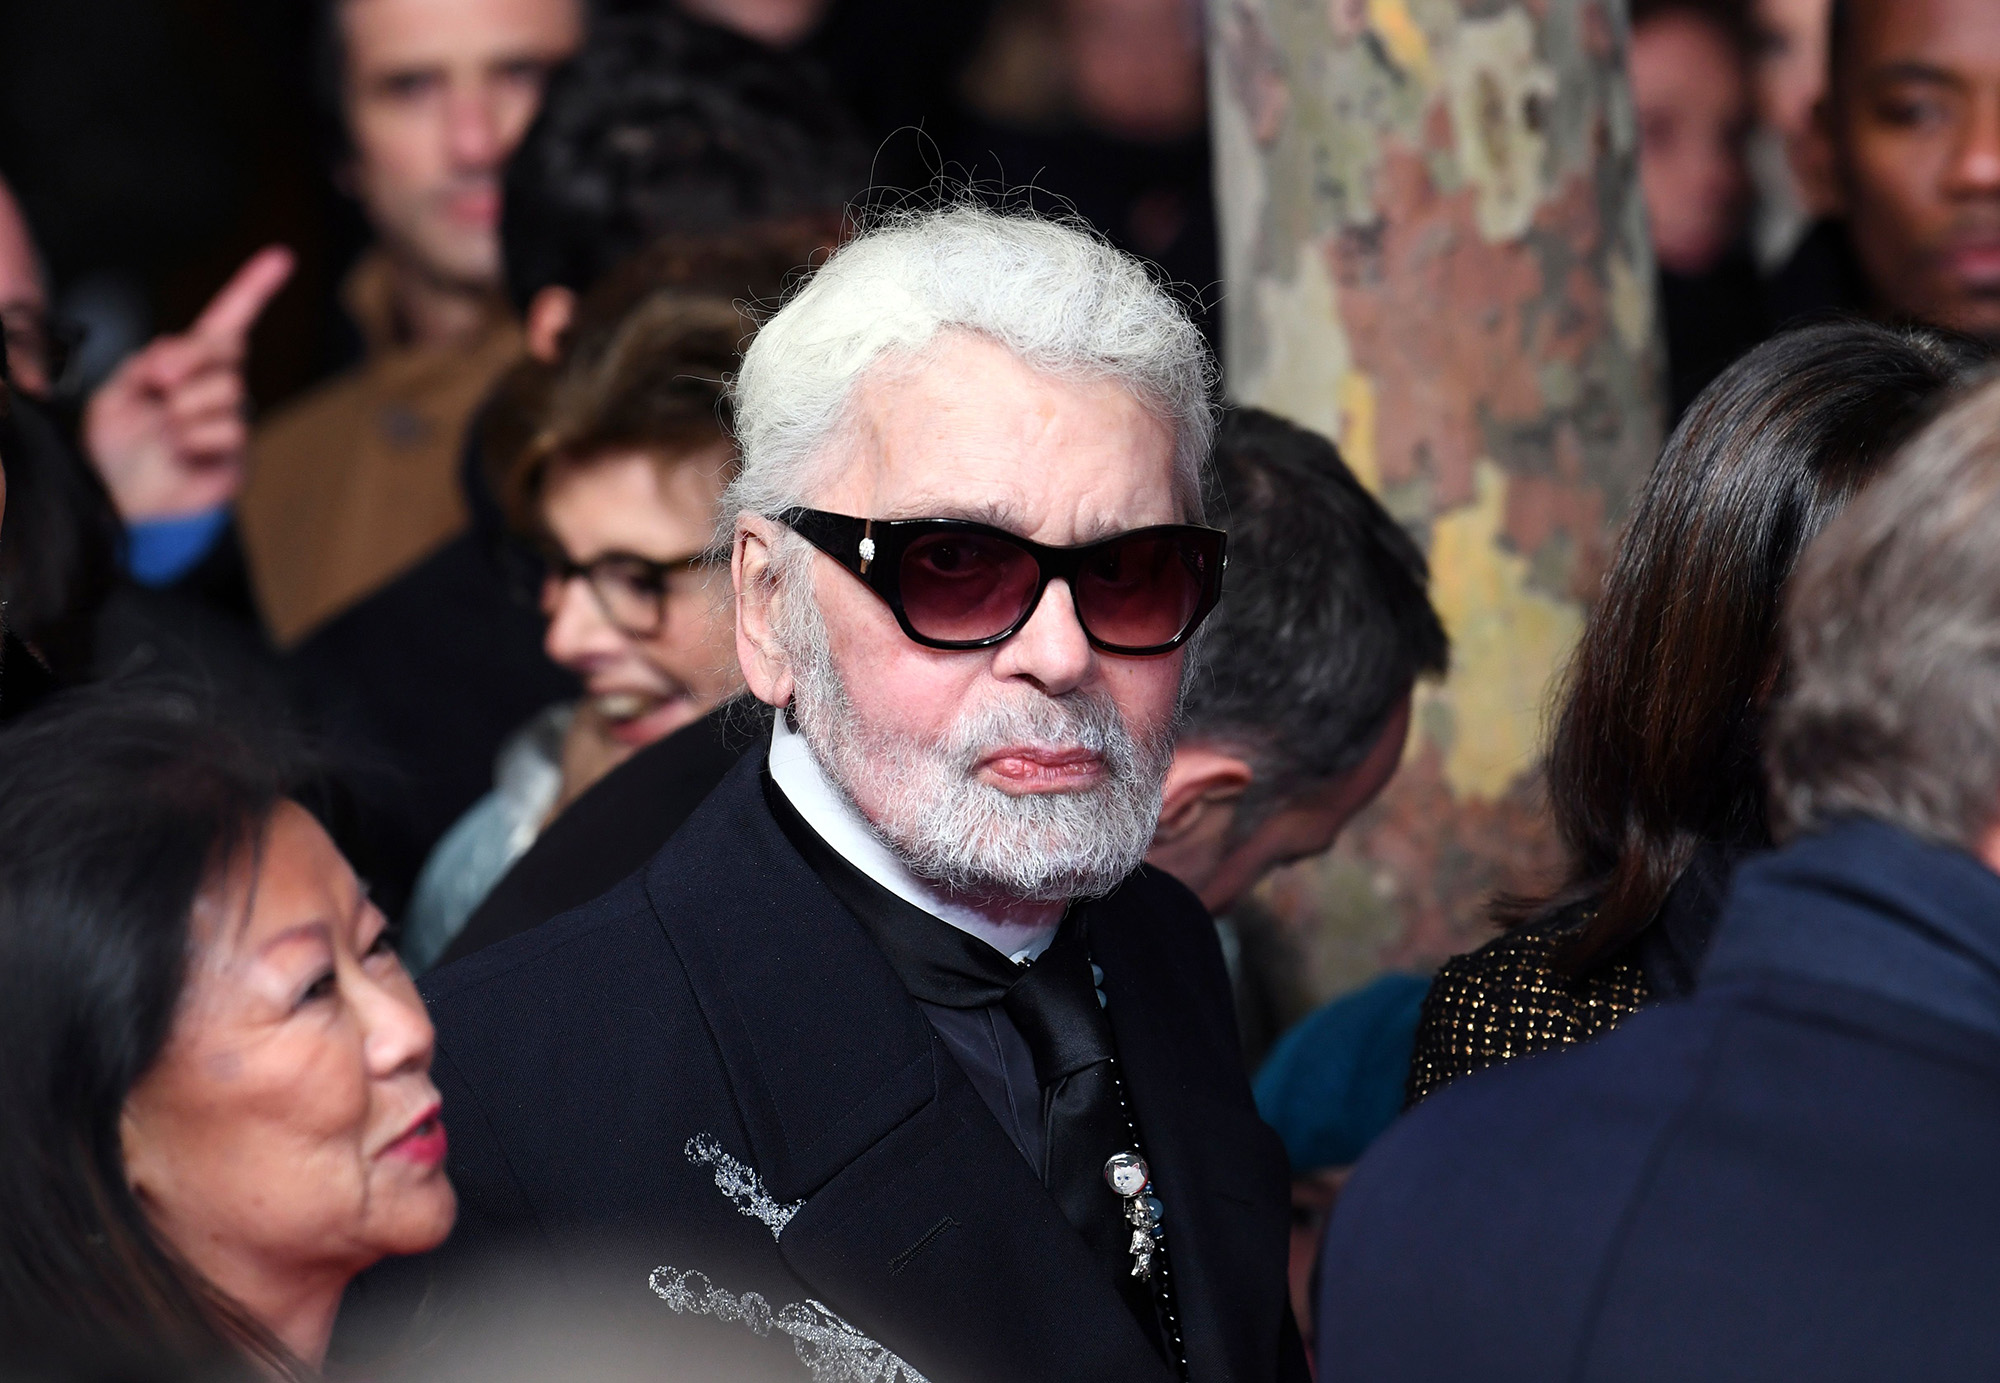 Karl Lagerfeld Misses Chanel Show Because He's 'Tired': Brand - Bloomberg